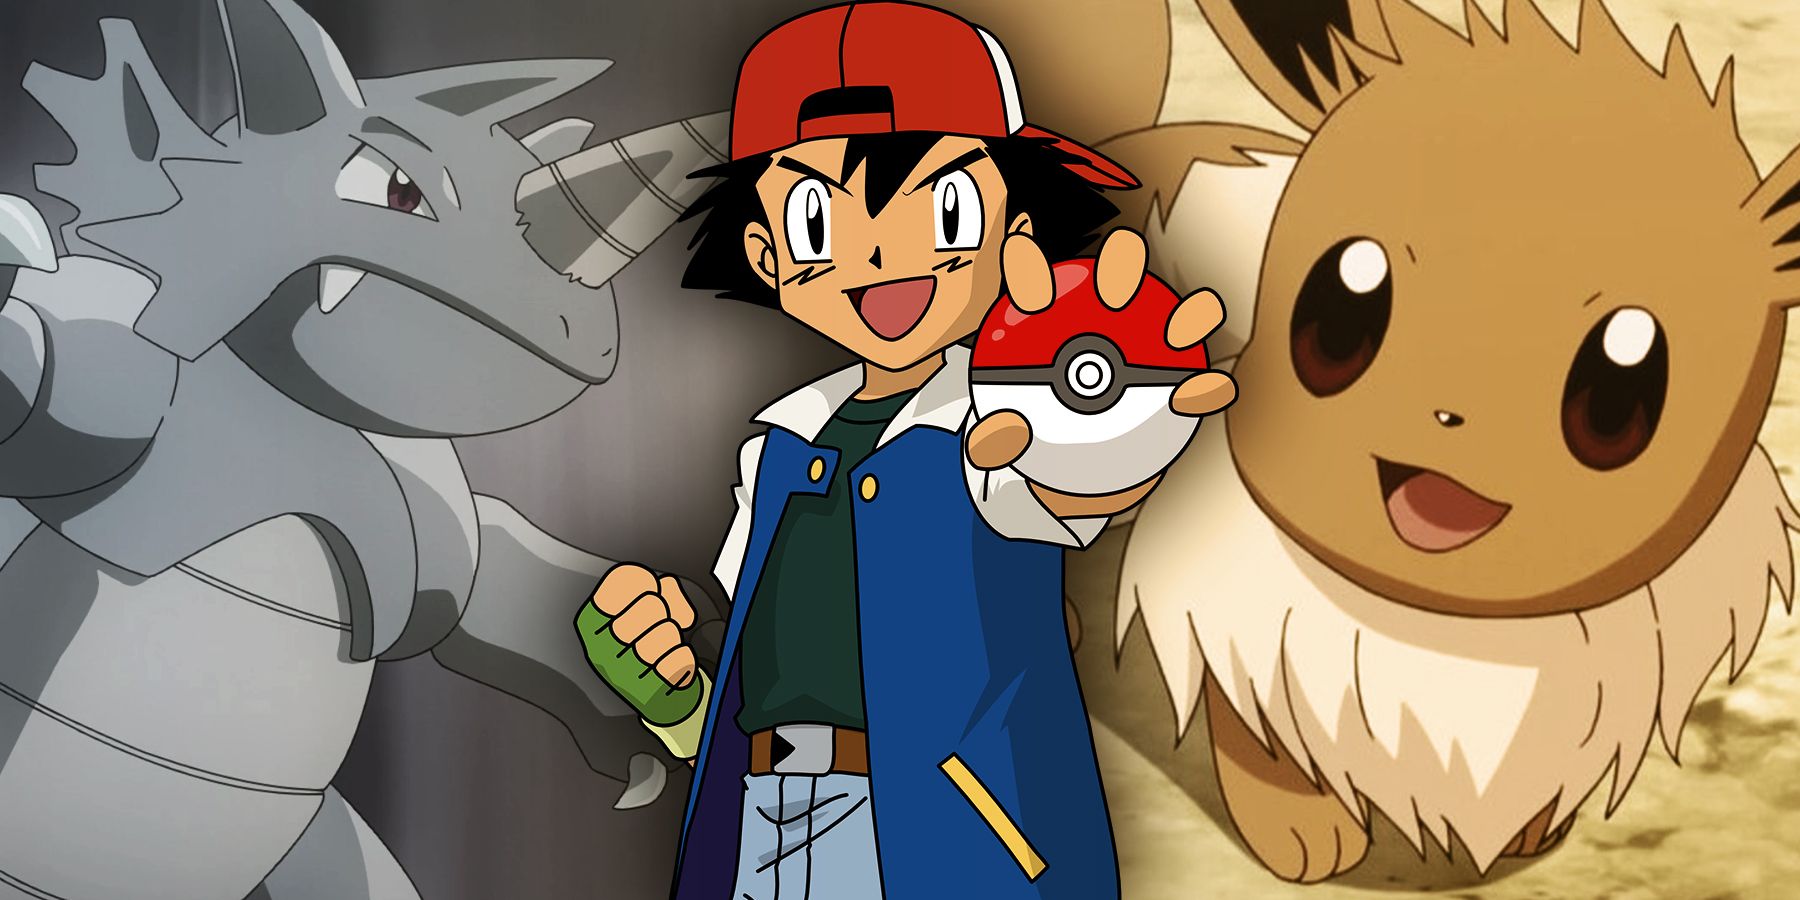 In the middle of the image, Ash holds up a pokeball. Behind him from left to right are ground/rock type Rhydon and normal type Eevee.